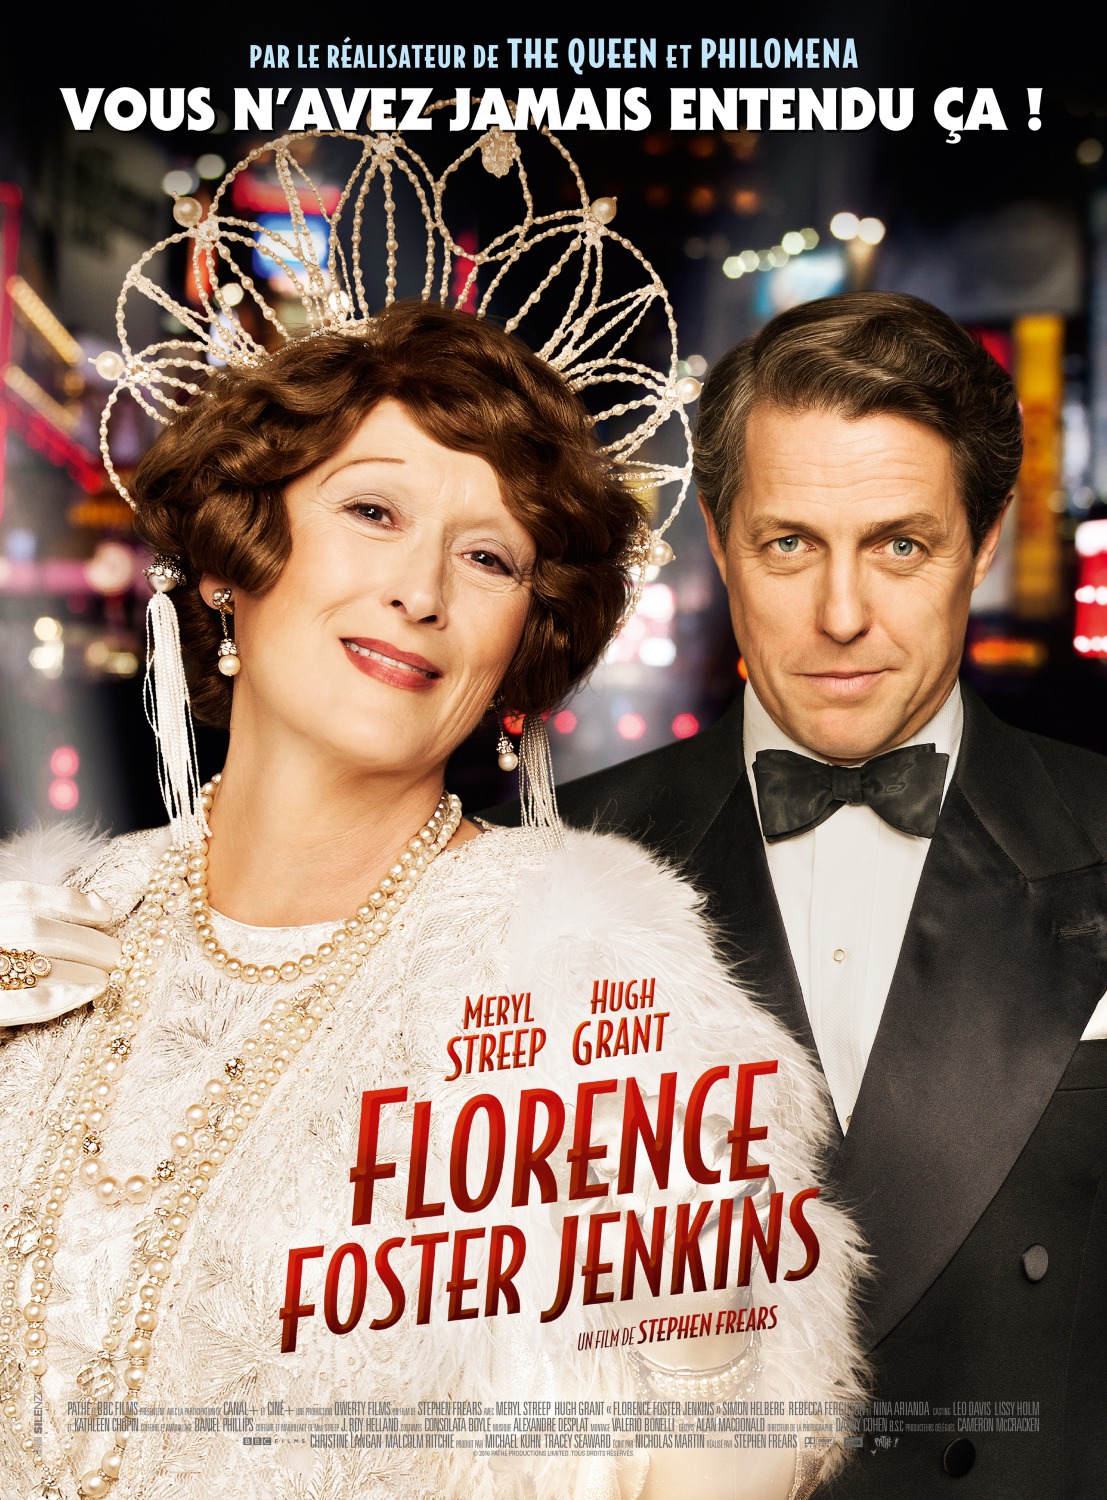 Extra Large Movie Poster Image for Florence Foster Jenkins (#5 of 6)